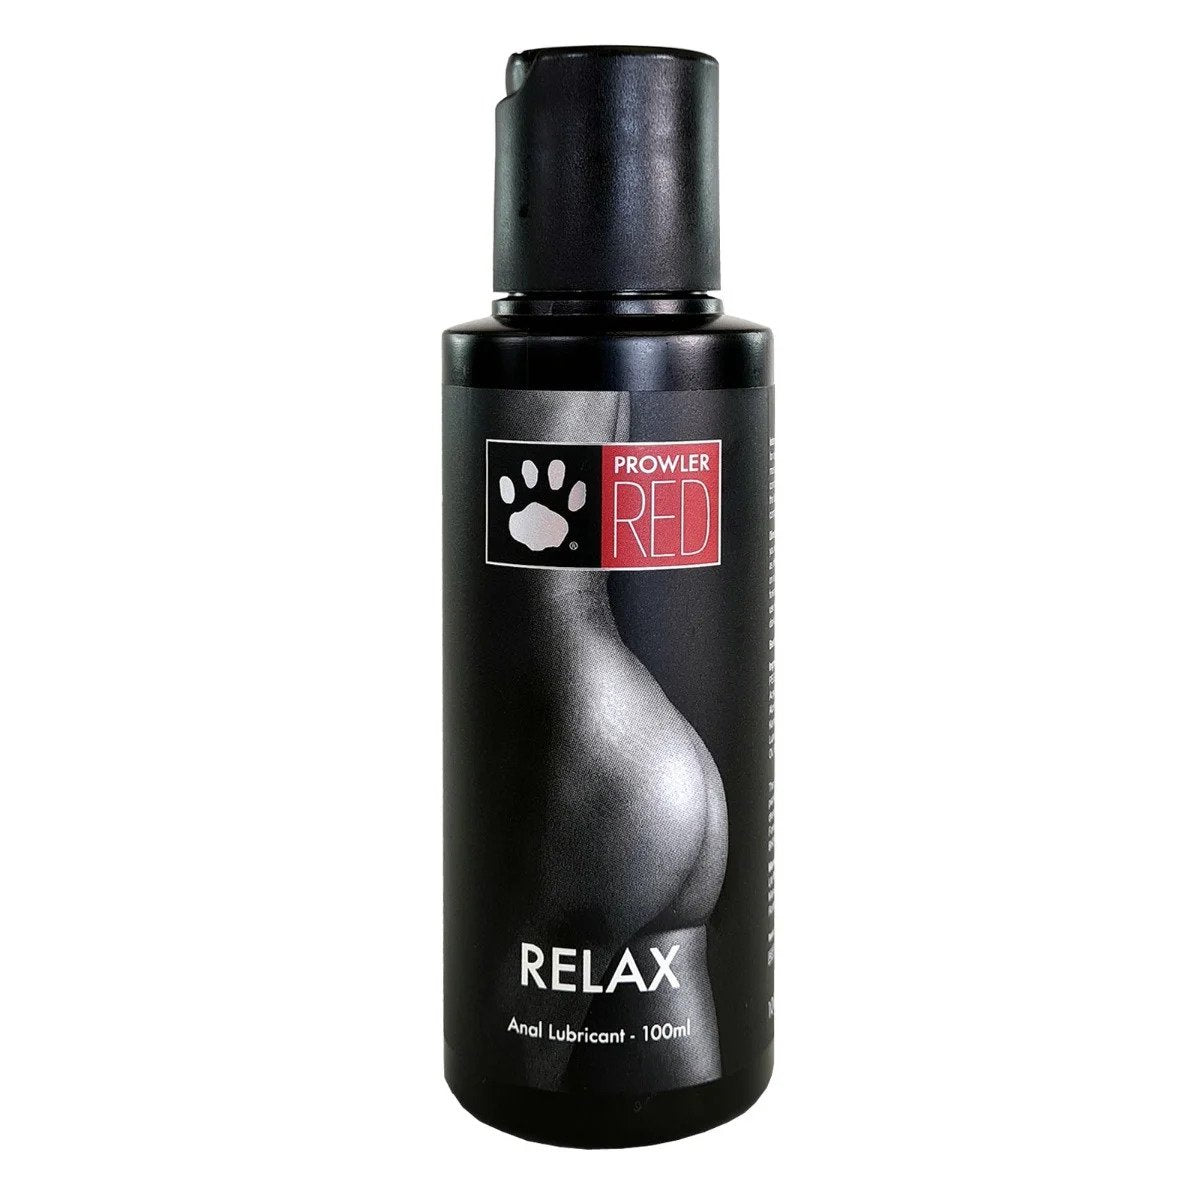 Prowler RED Relax Anal Lubricant For ultimate comfort